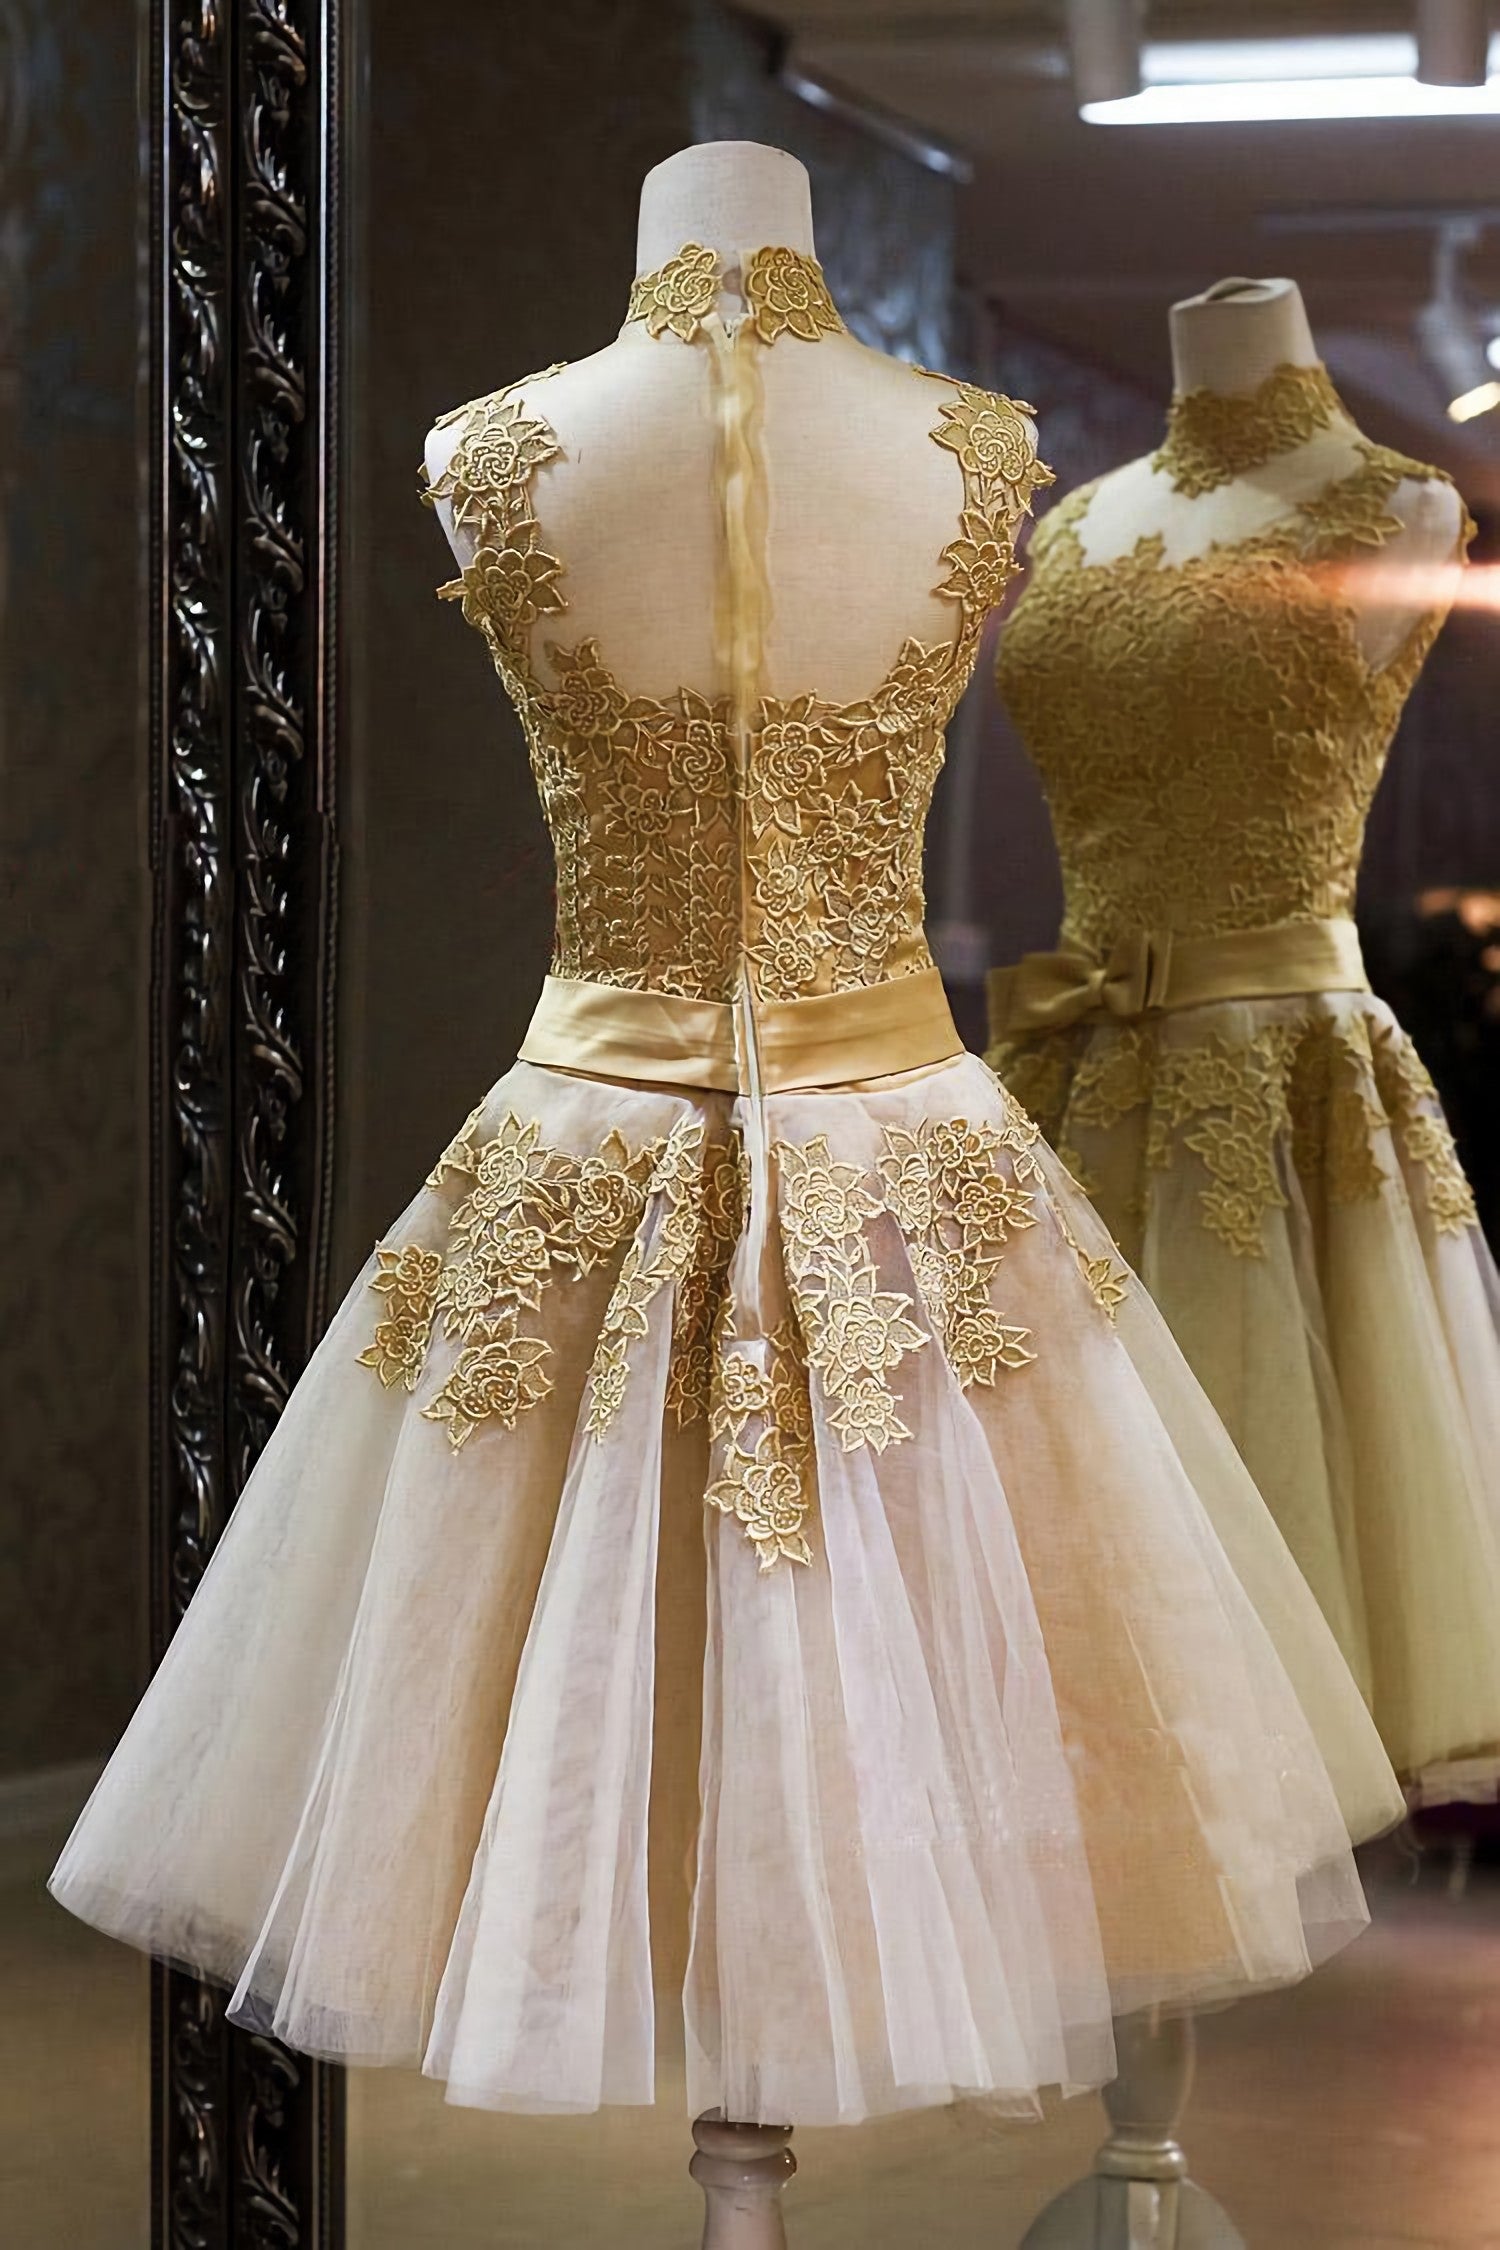 Party Dress Name, Gold Lace High Neck Short Prom Dress, Homecoming Dress